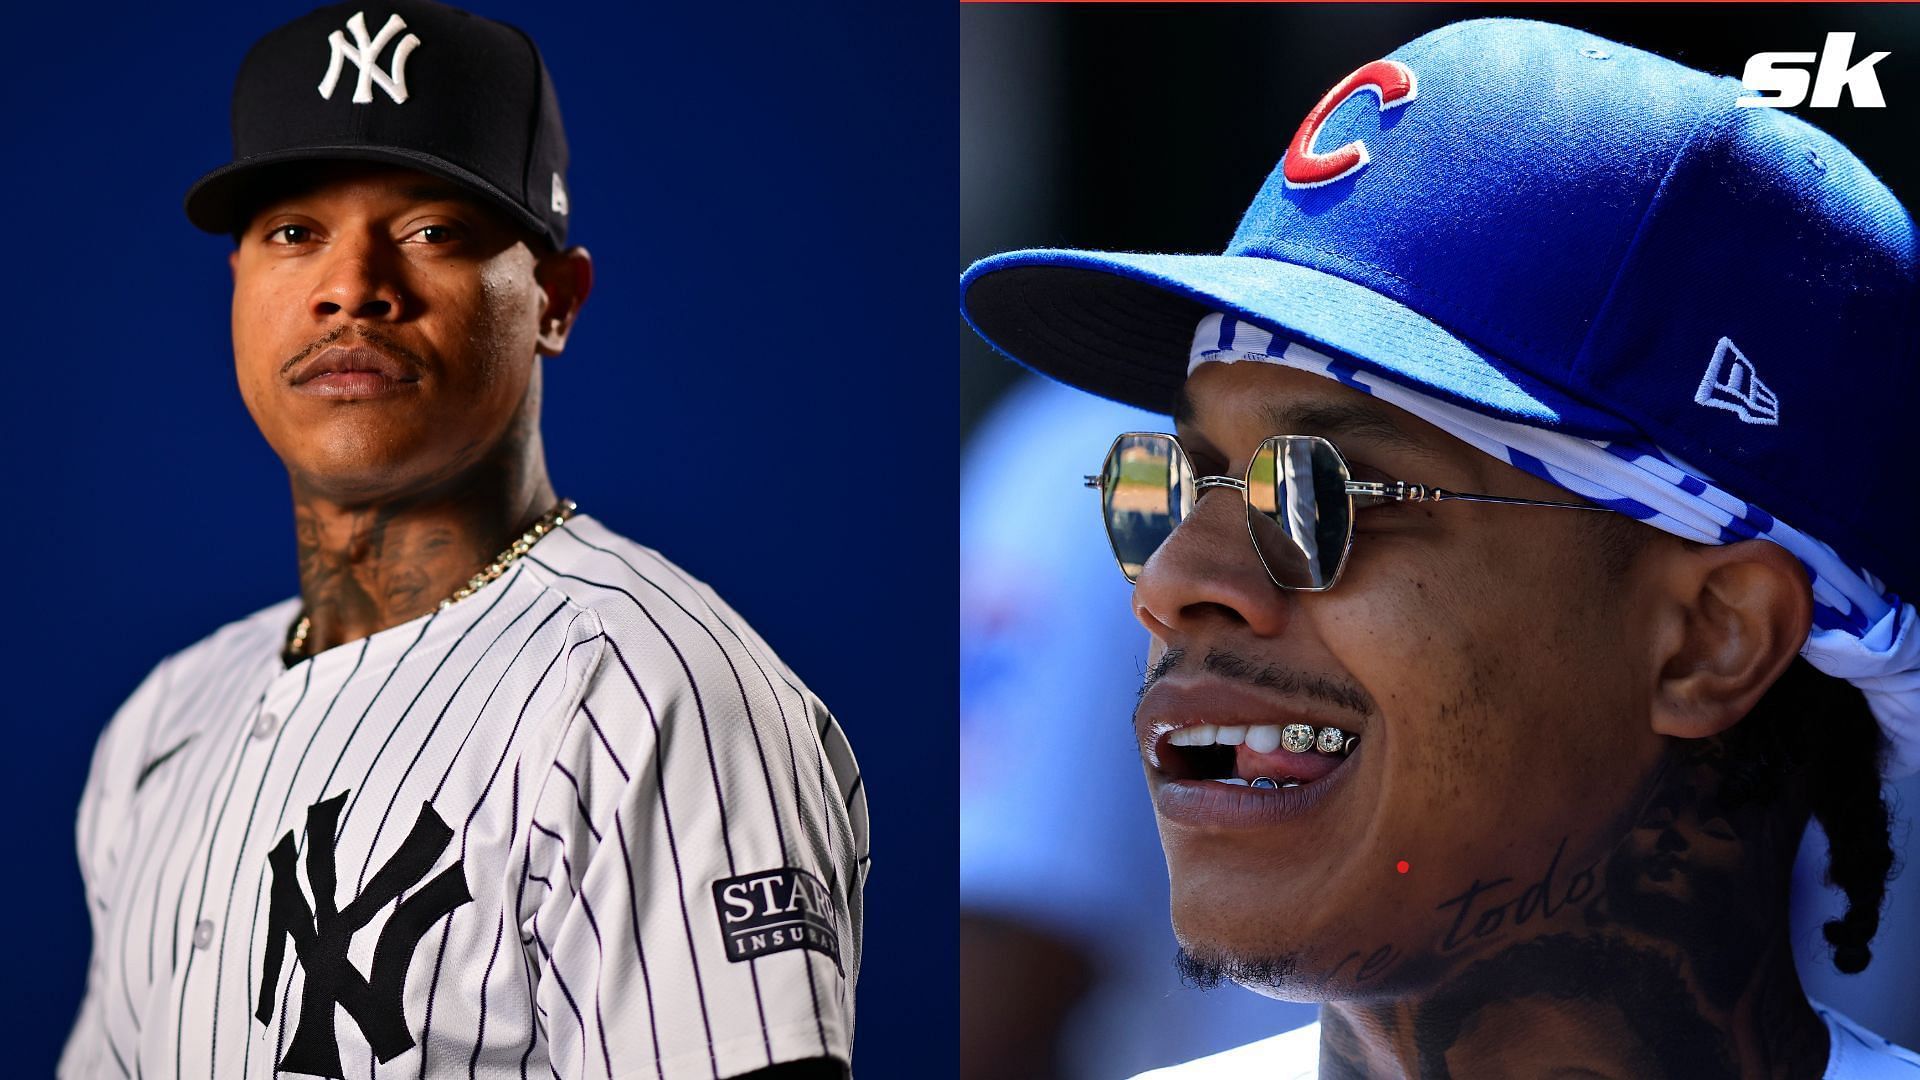 Yankees fans were excited to see pitcher Marcus Stroman take to the mound in pinstripes